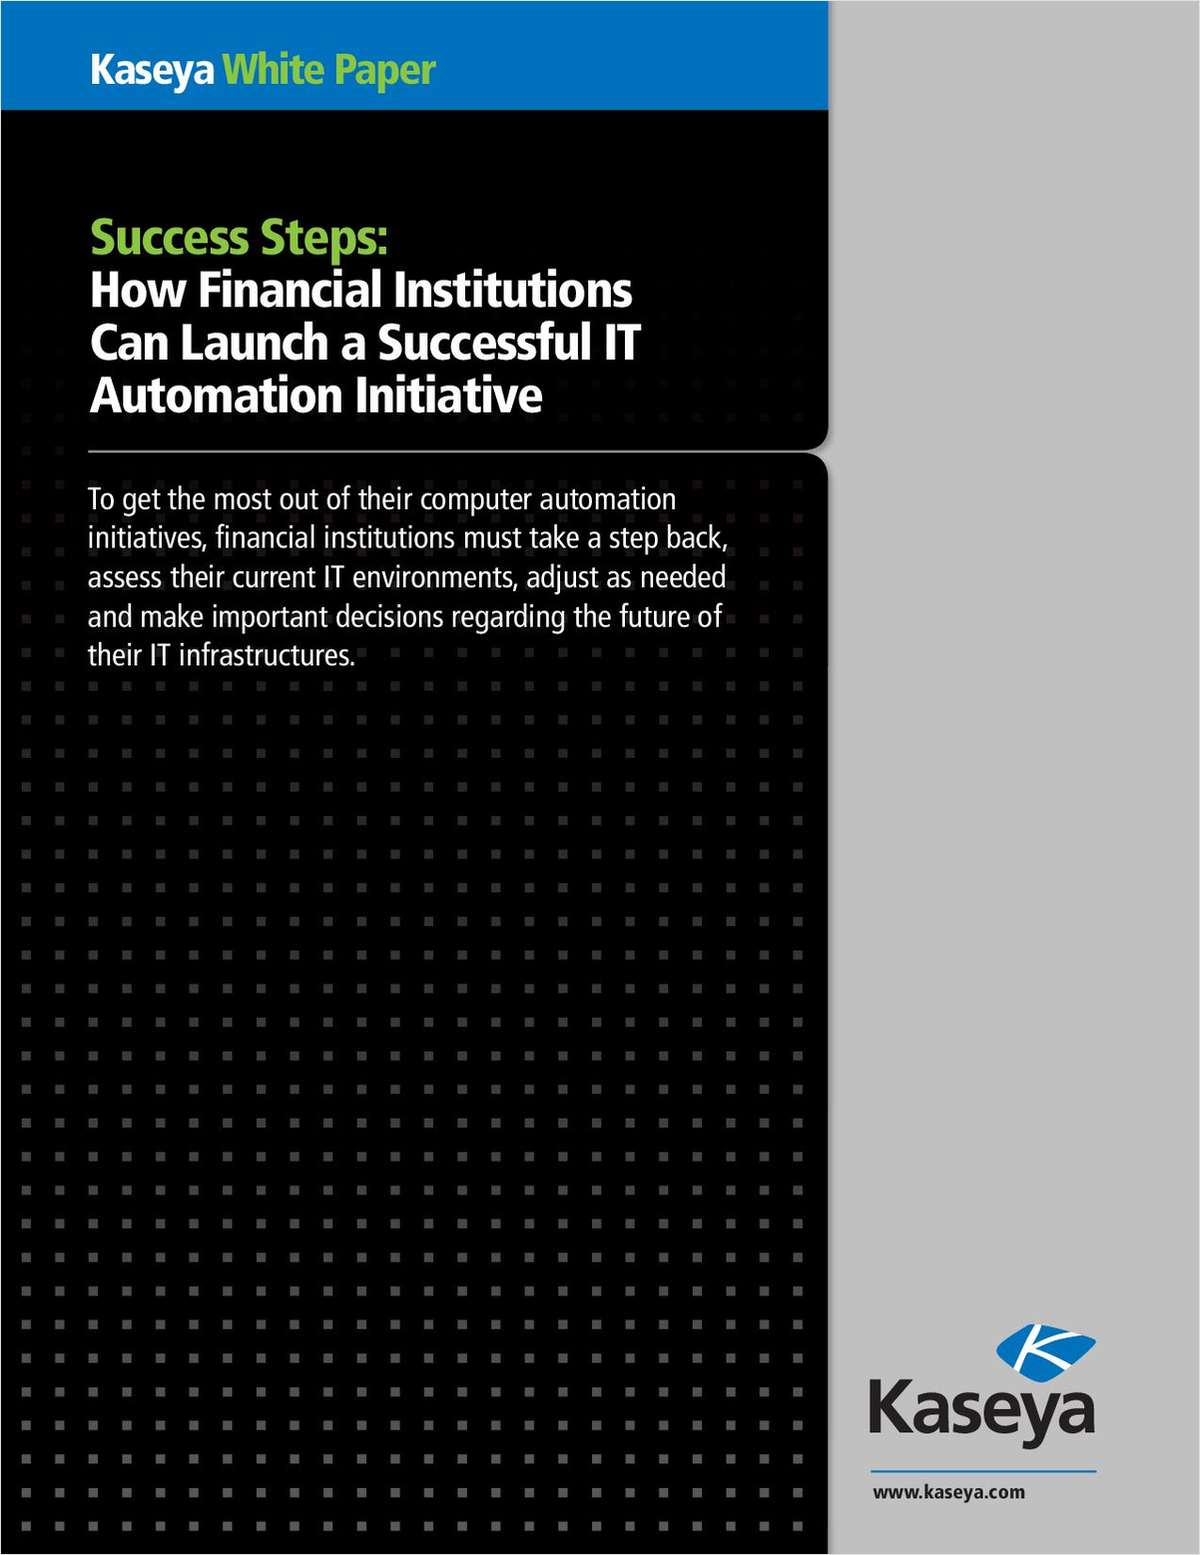 How Financial Institutions Can Launch a Successful IT Automation Initiative